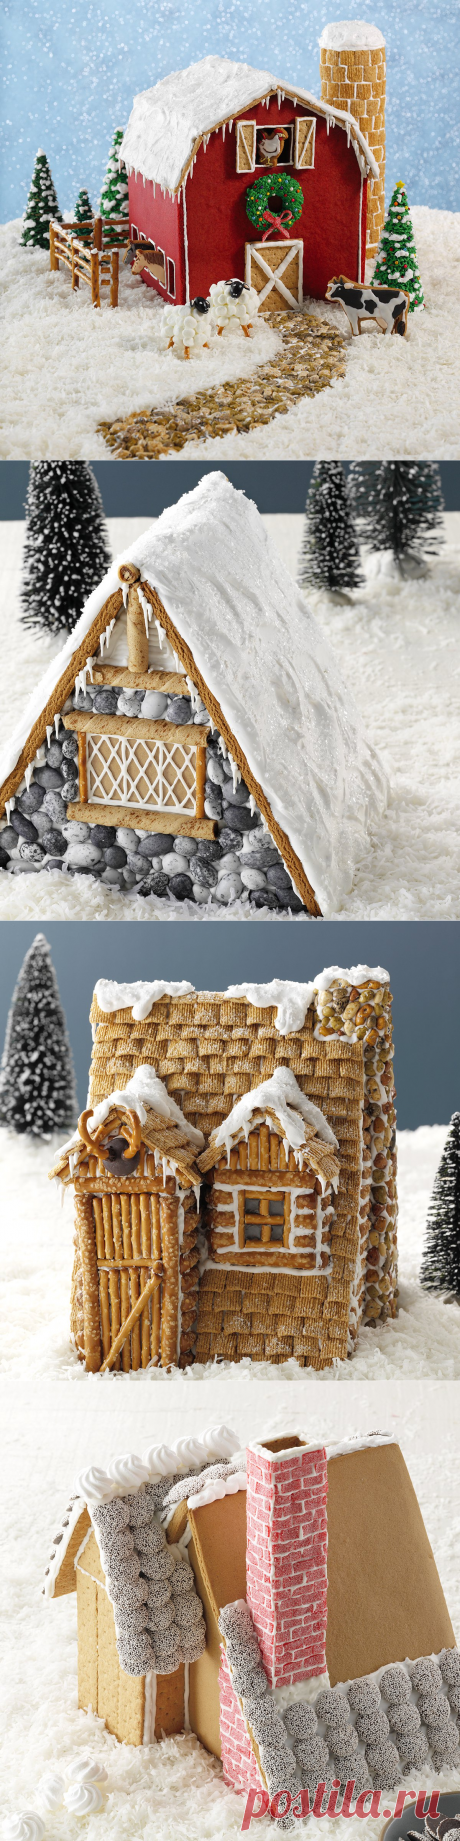 20 Adorable Gingerbread House Ideas | Taste of Home